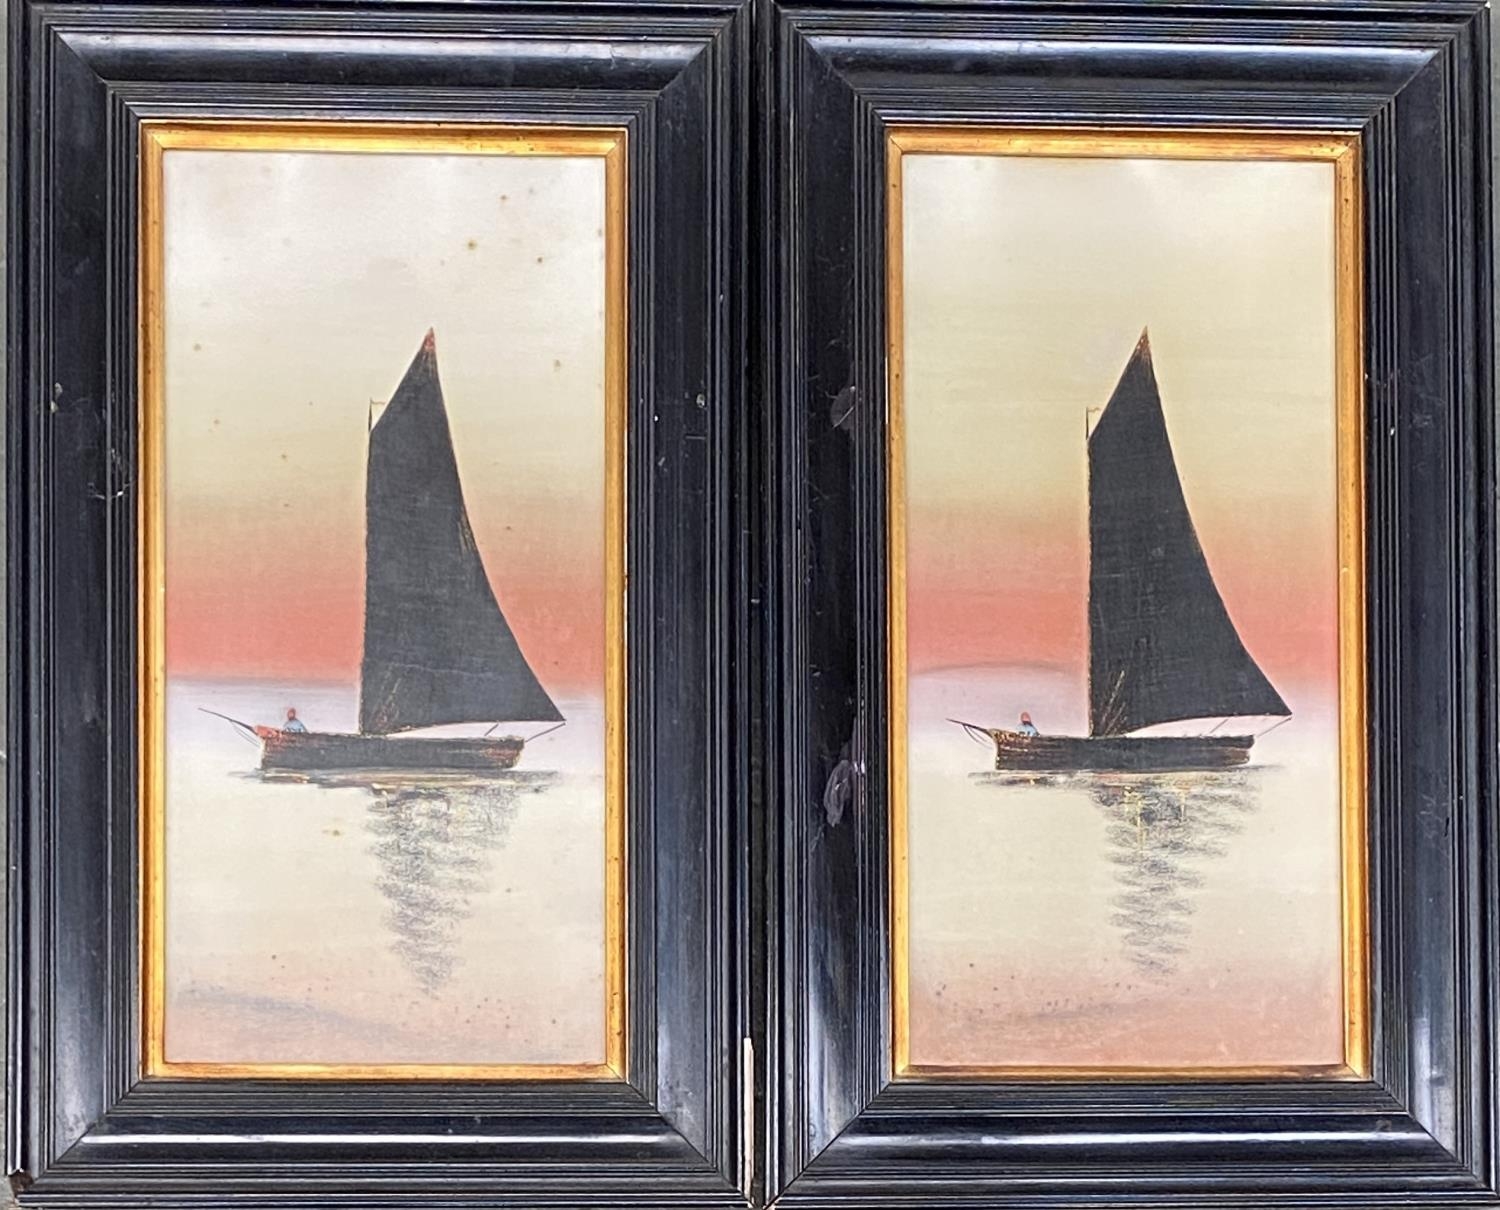 Two 20th century mixed media pictures of boats at sunset, both 34x16cm